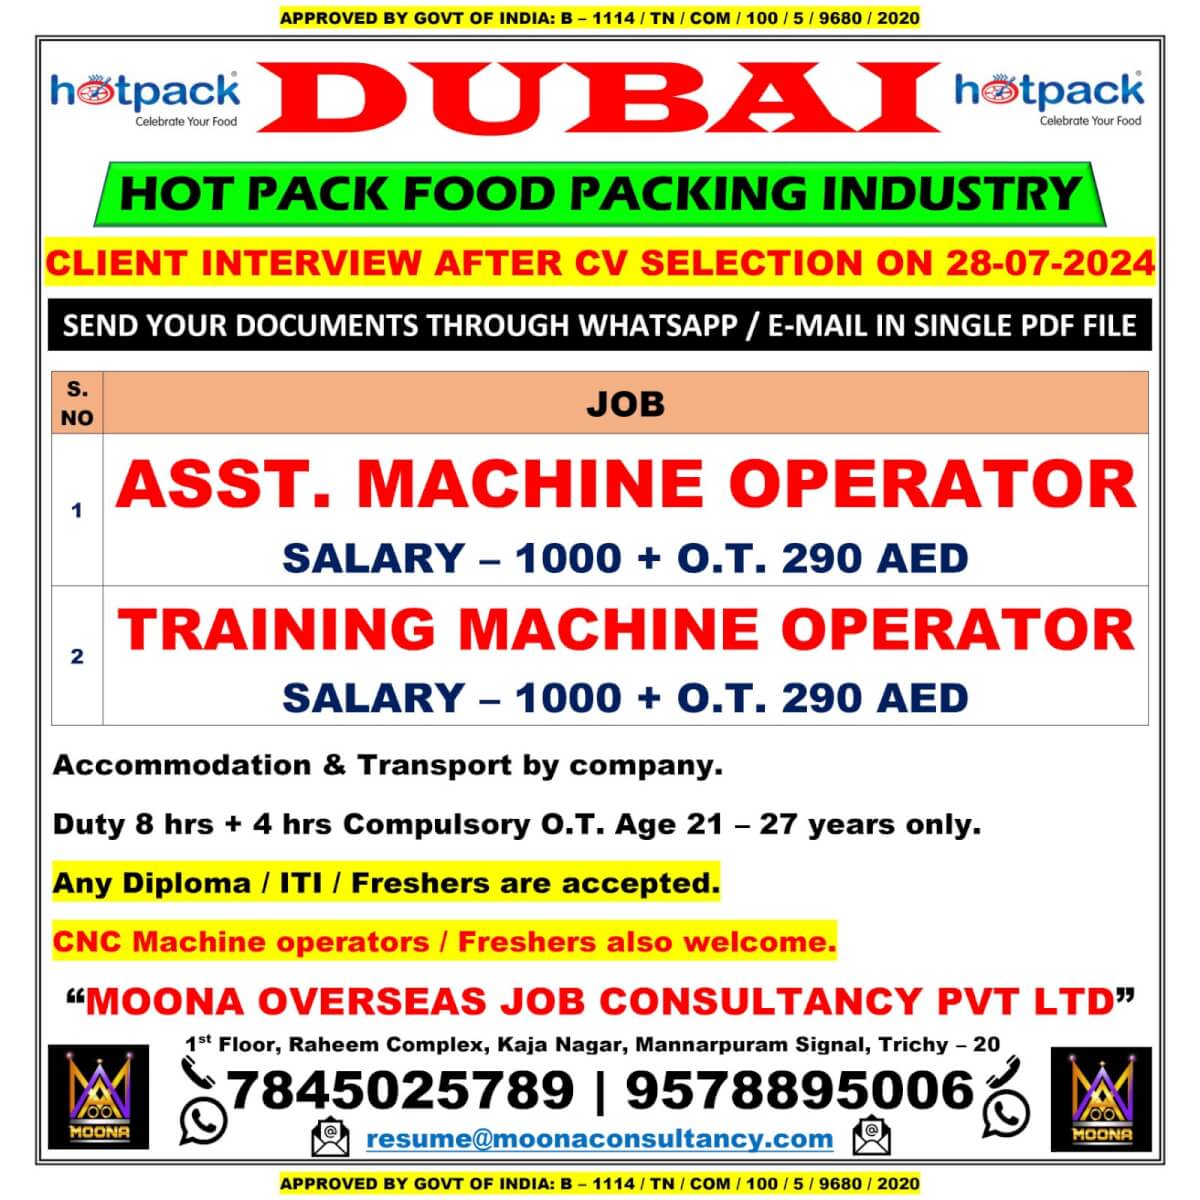 DUBAI HOT PACK FOOD PACKING INDUSTRY COMPANY VACANCY